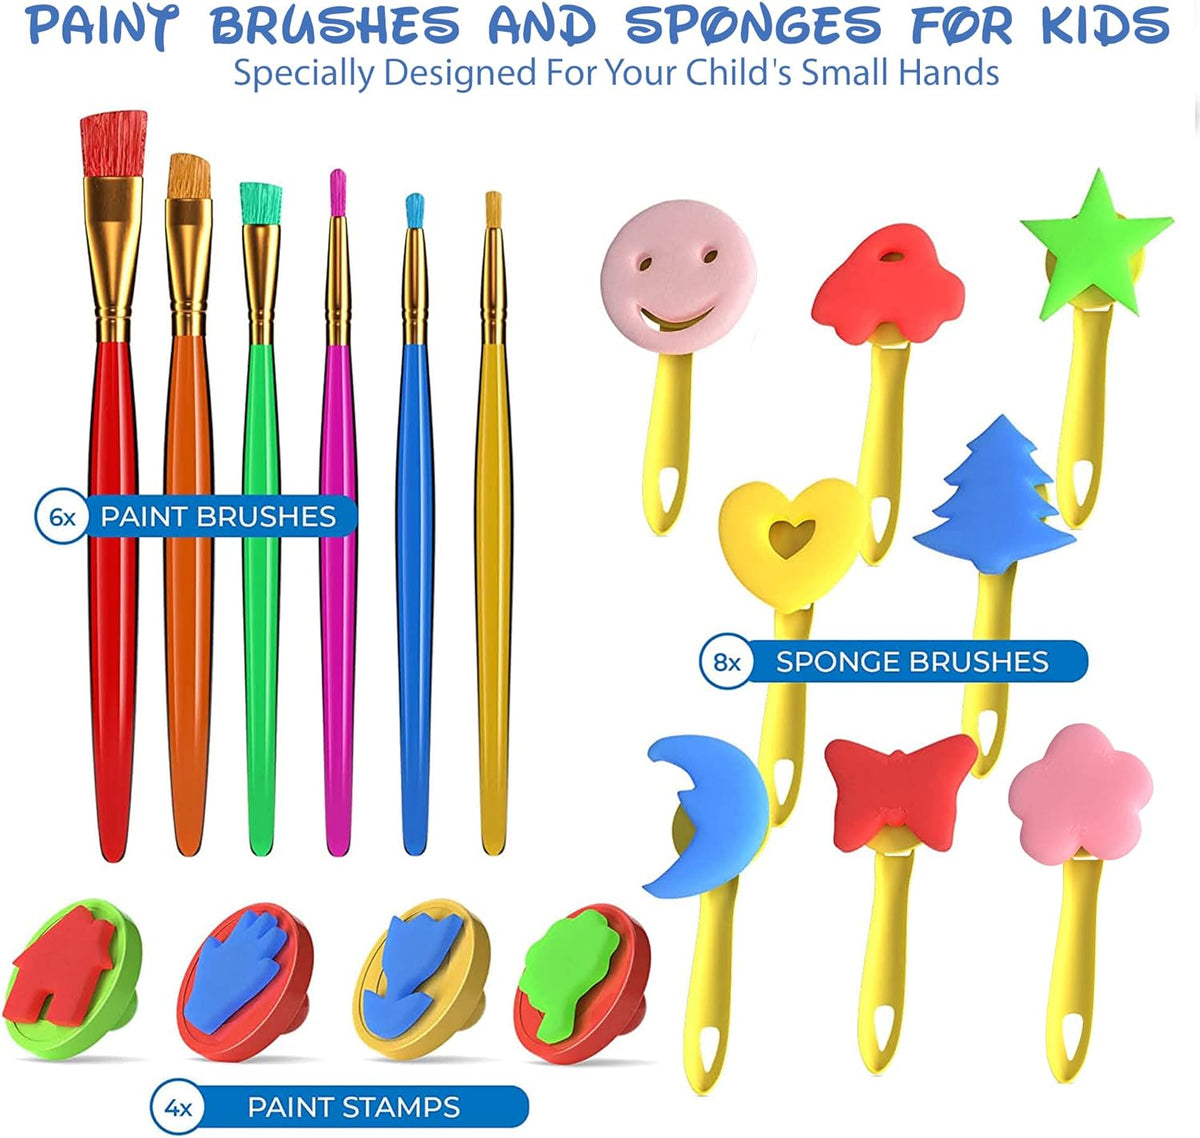 Finger Paint Set for Kids - Toddler painting set includes kids washable  paint and brush set, toddler paint paper pad, finger paint sponges and smock